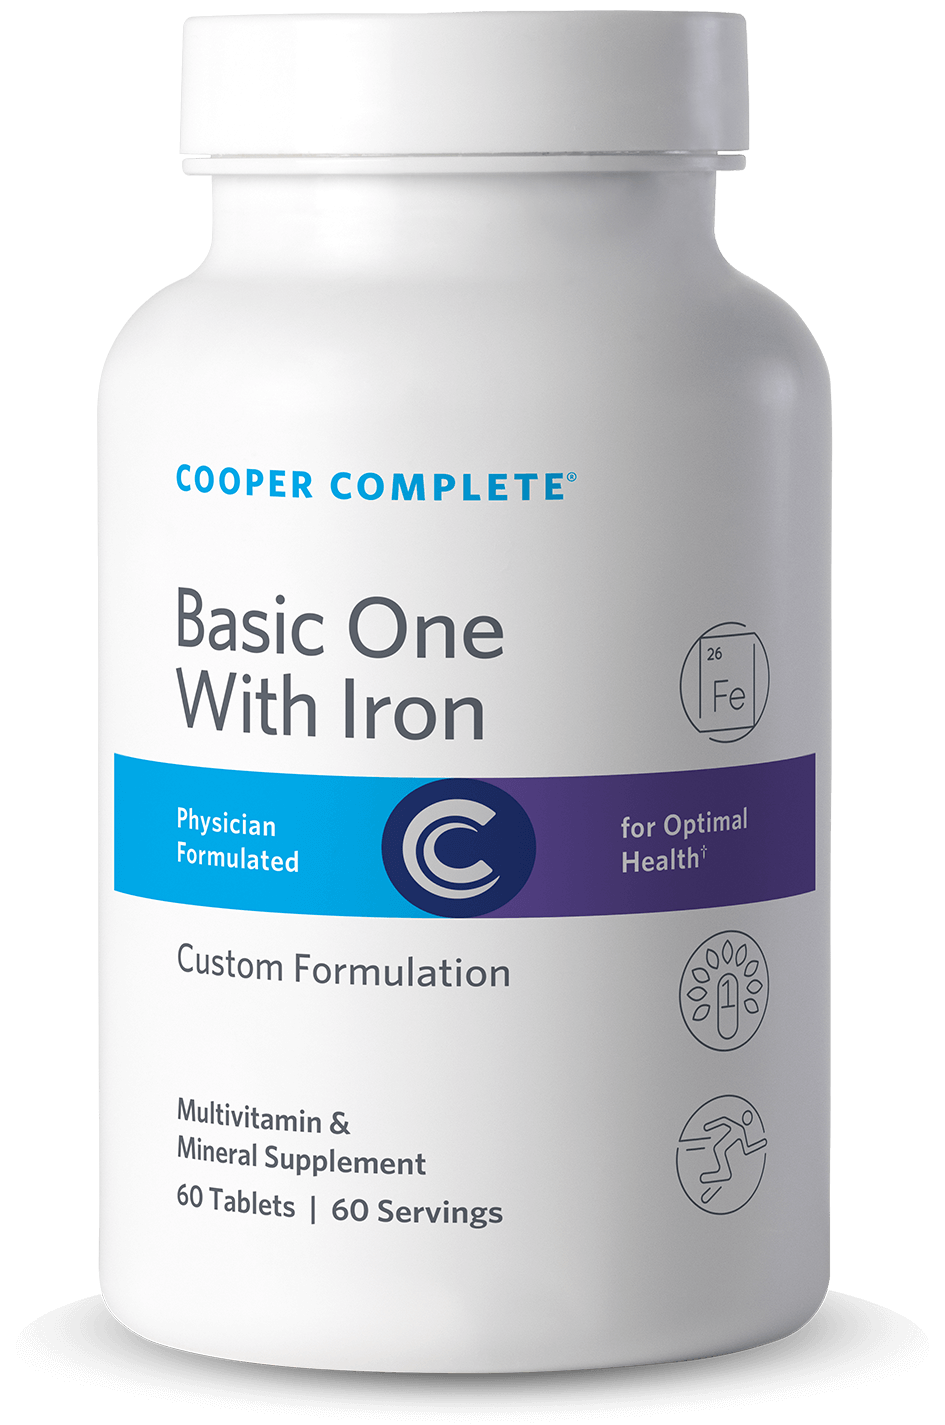 Bottle of Cooper Complete Daily Basic One With Iron Multivitamin and Mineral Formulation